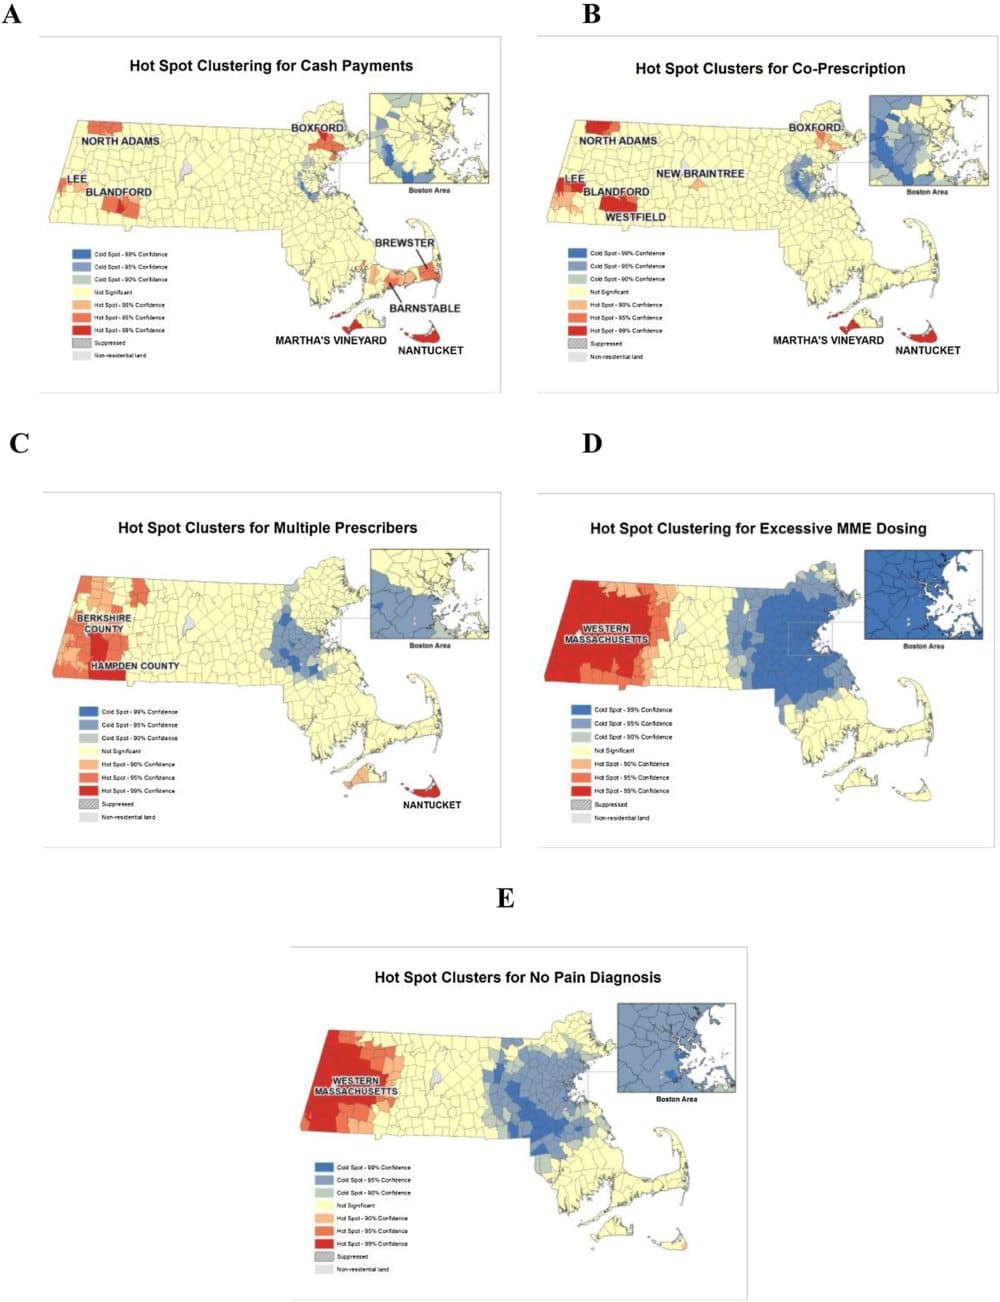 Clustering of potentially inappropriate opioid prescription practices (PIP) in Massachusetts from 2011 to 2015. (Courtesy the International Journal of Drug Policy)